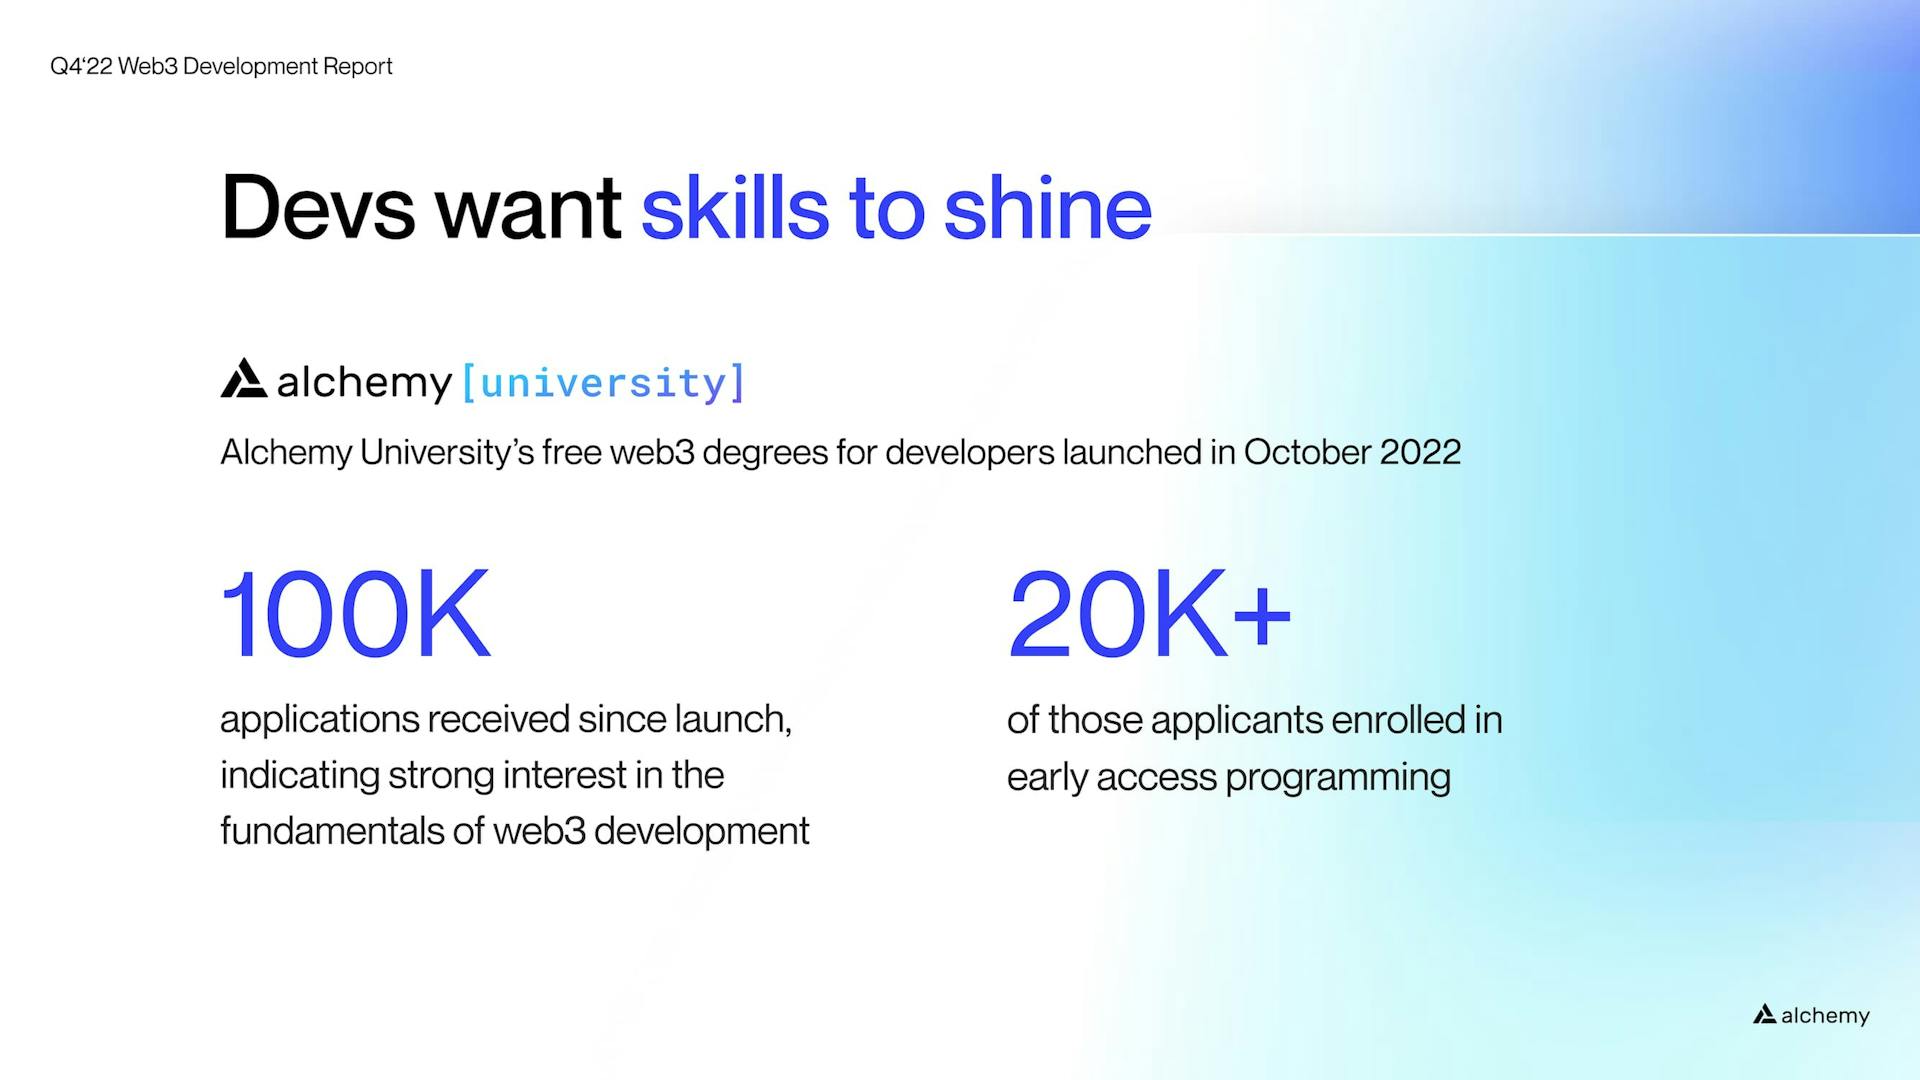 Over 100,000 people applied to Alchemy University's free Ethereum Developer Bootcamp in Q4 2022.